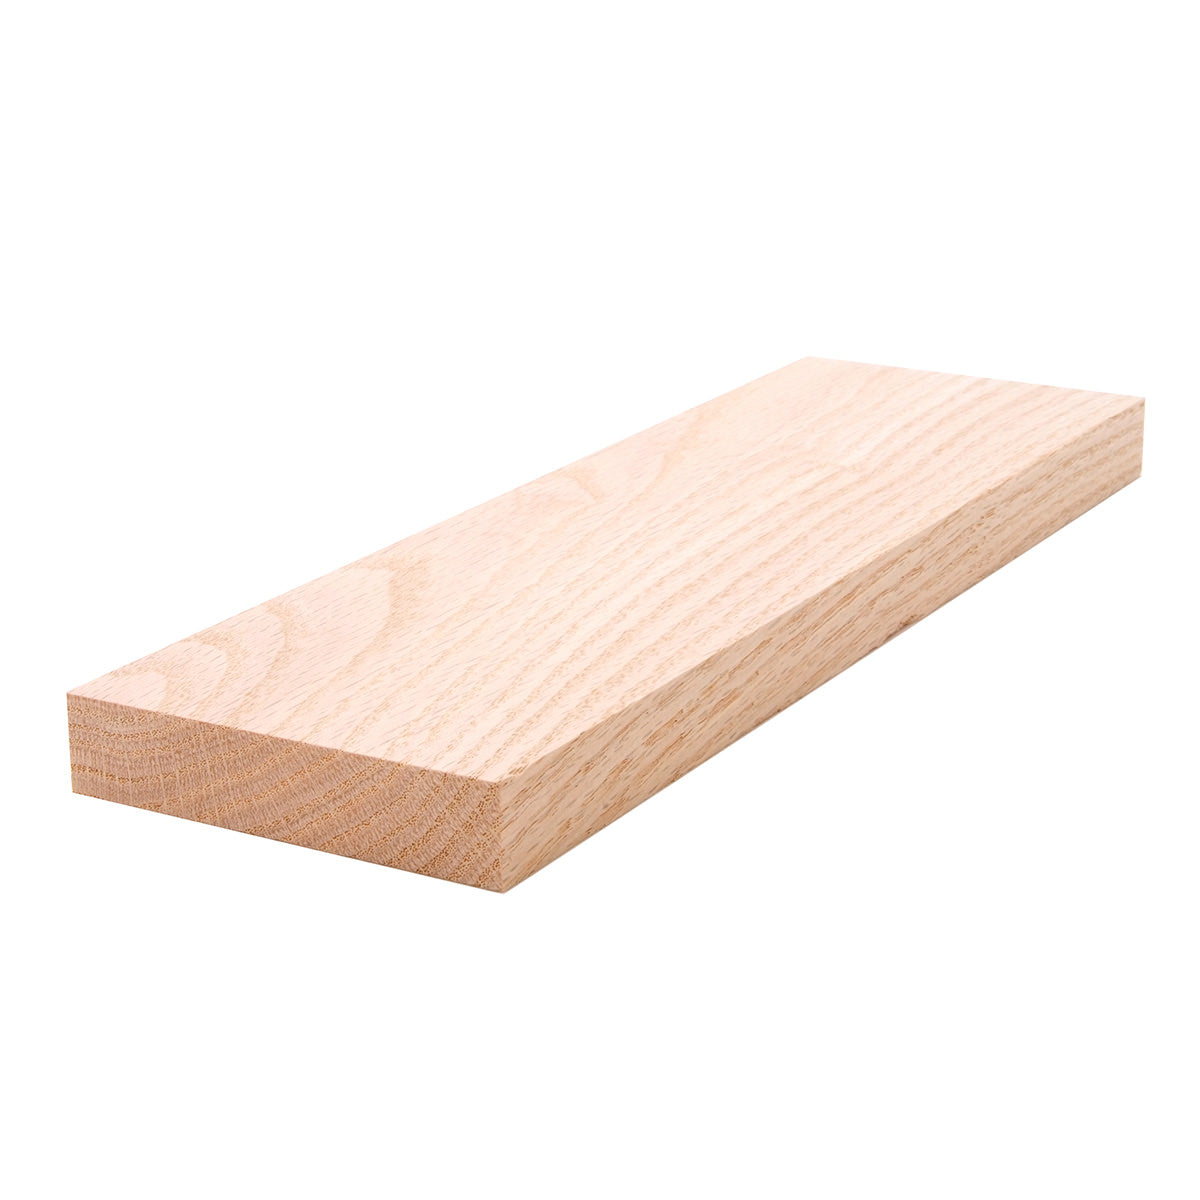 1”x4” Red Oak, Dressed Four Side Select Grade